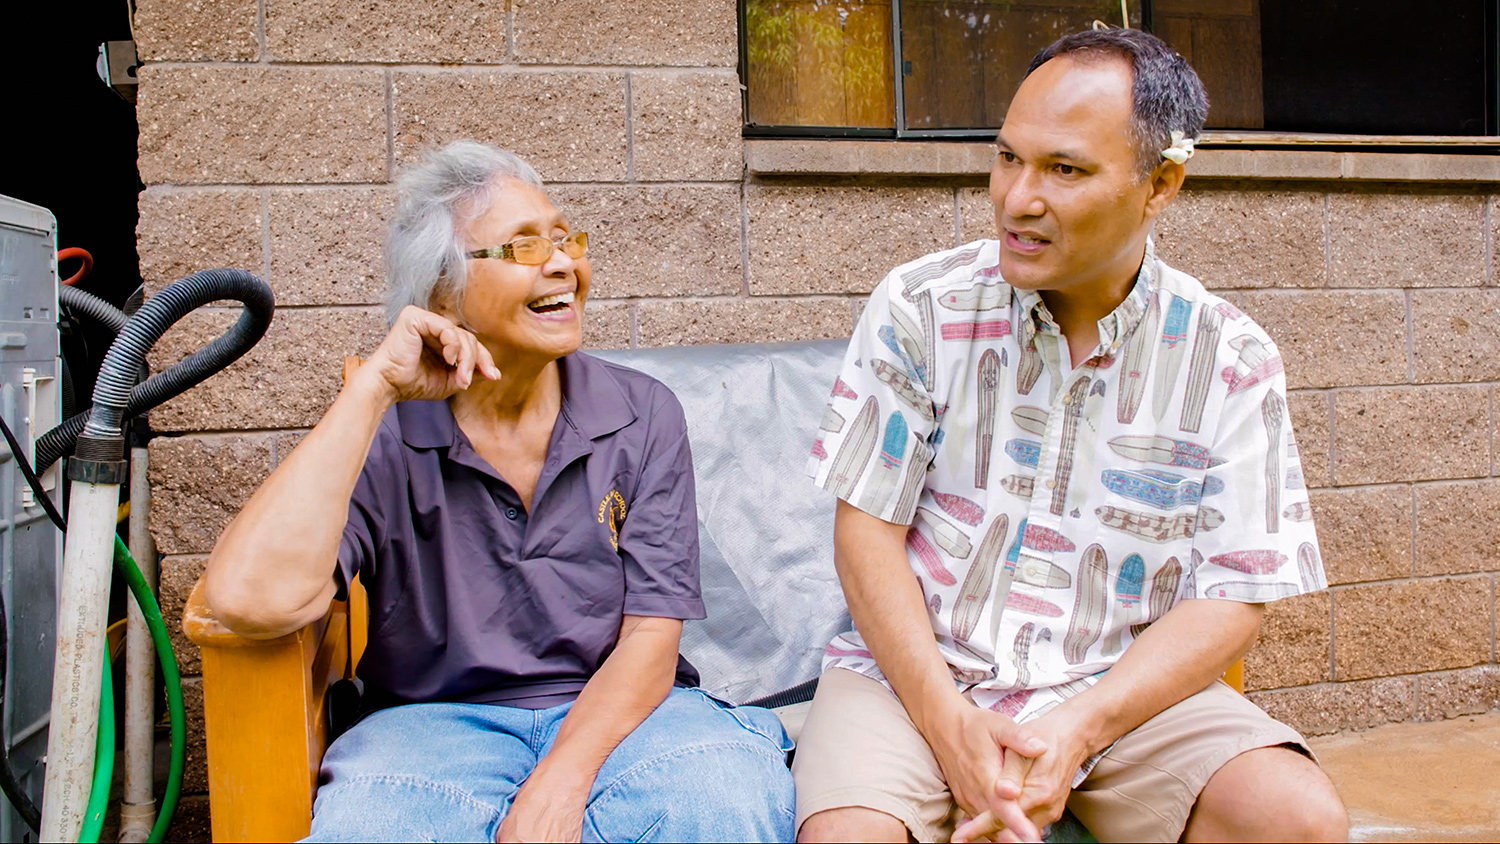 A man in khaki shorts and surfboard button-up shirt sits next to an elderly woman as they discuss energy costs in Hawaii.